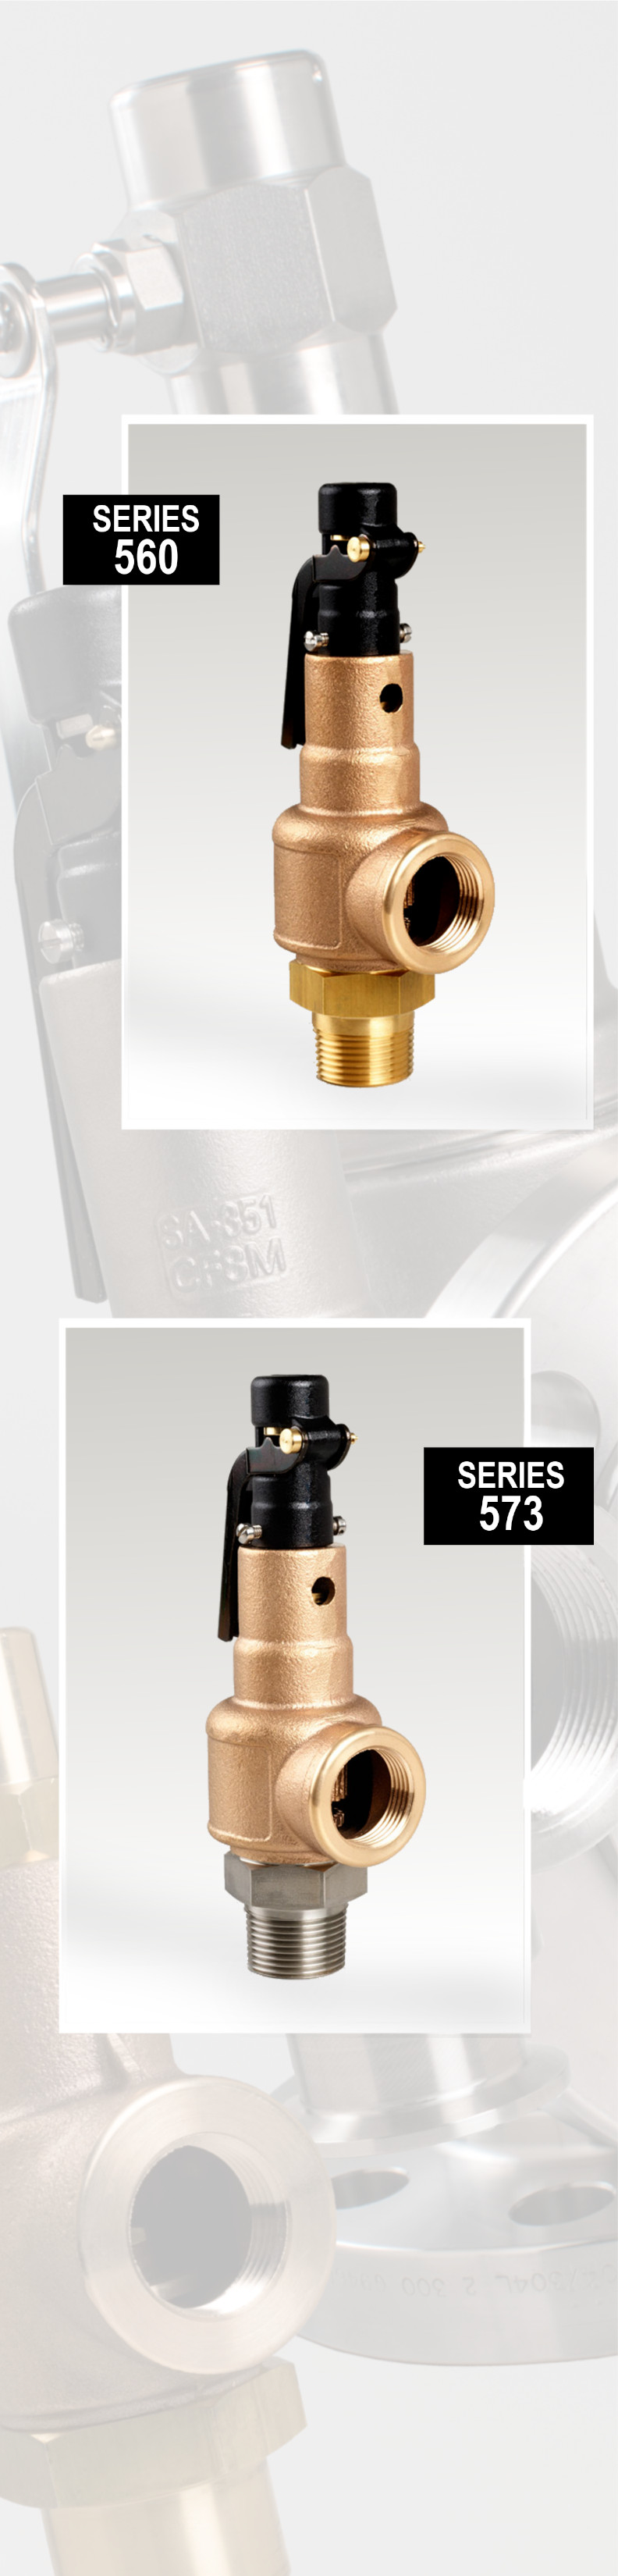 Series 560 brass and stainless safety valves